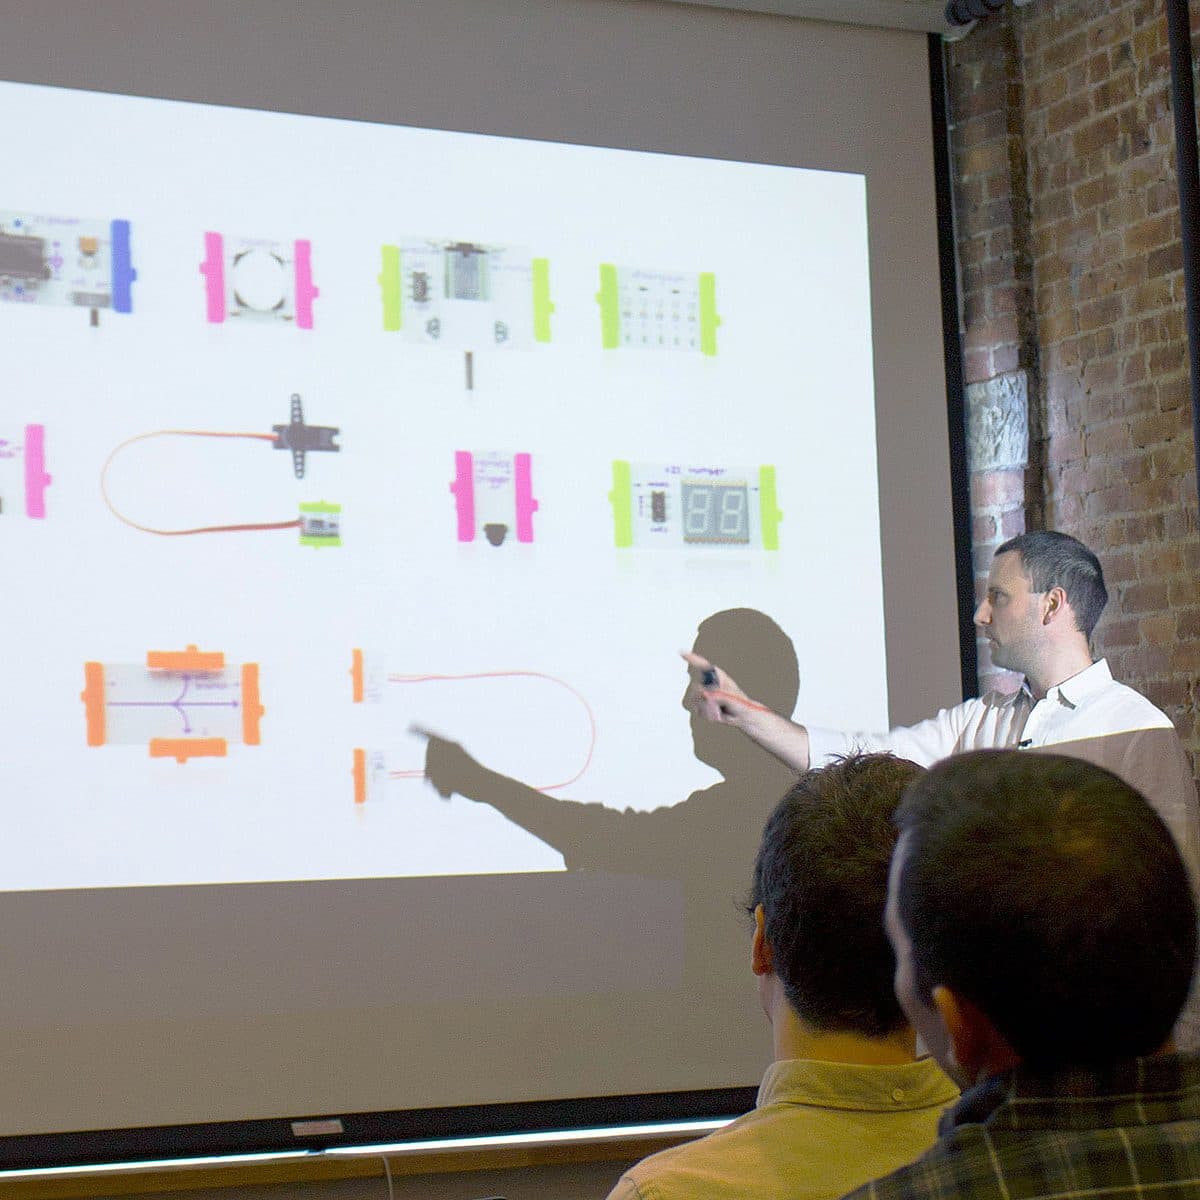 A presenter is pointing at a slide displaying diagrams of electronic components labeled "VCR" in front of a brick wall. The audience is seated and attentively watching the presentation.